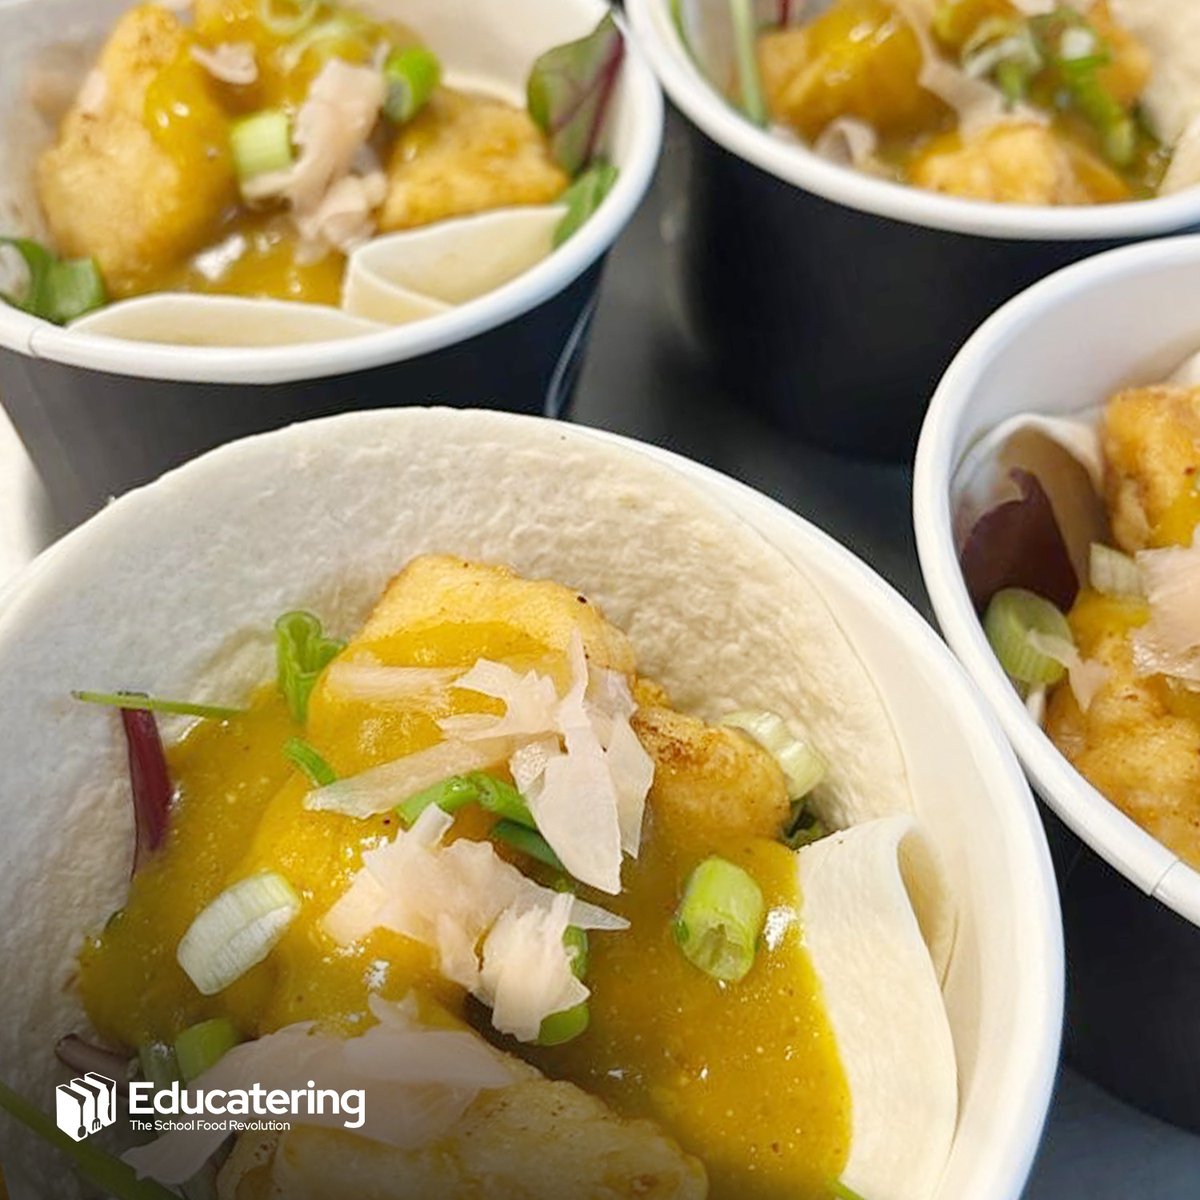 Grab and go these delicious Katsu Chicken Wraps to get a much-needed boost of energy! Enjoy the delicious flavor and convenience that’ll give you the jump to get through your day! #KatsuChickenWraps #GrabAndGo #EnergyBoost #DeliciousFlavors #schooldinners